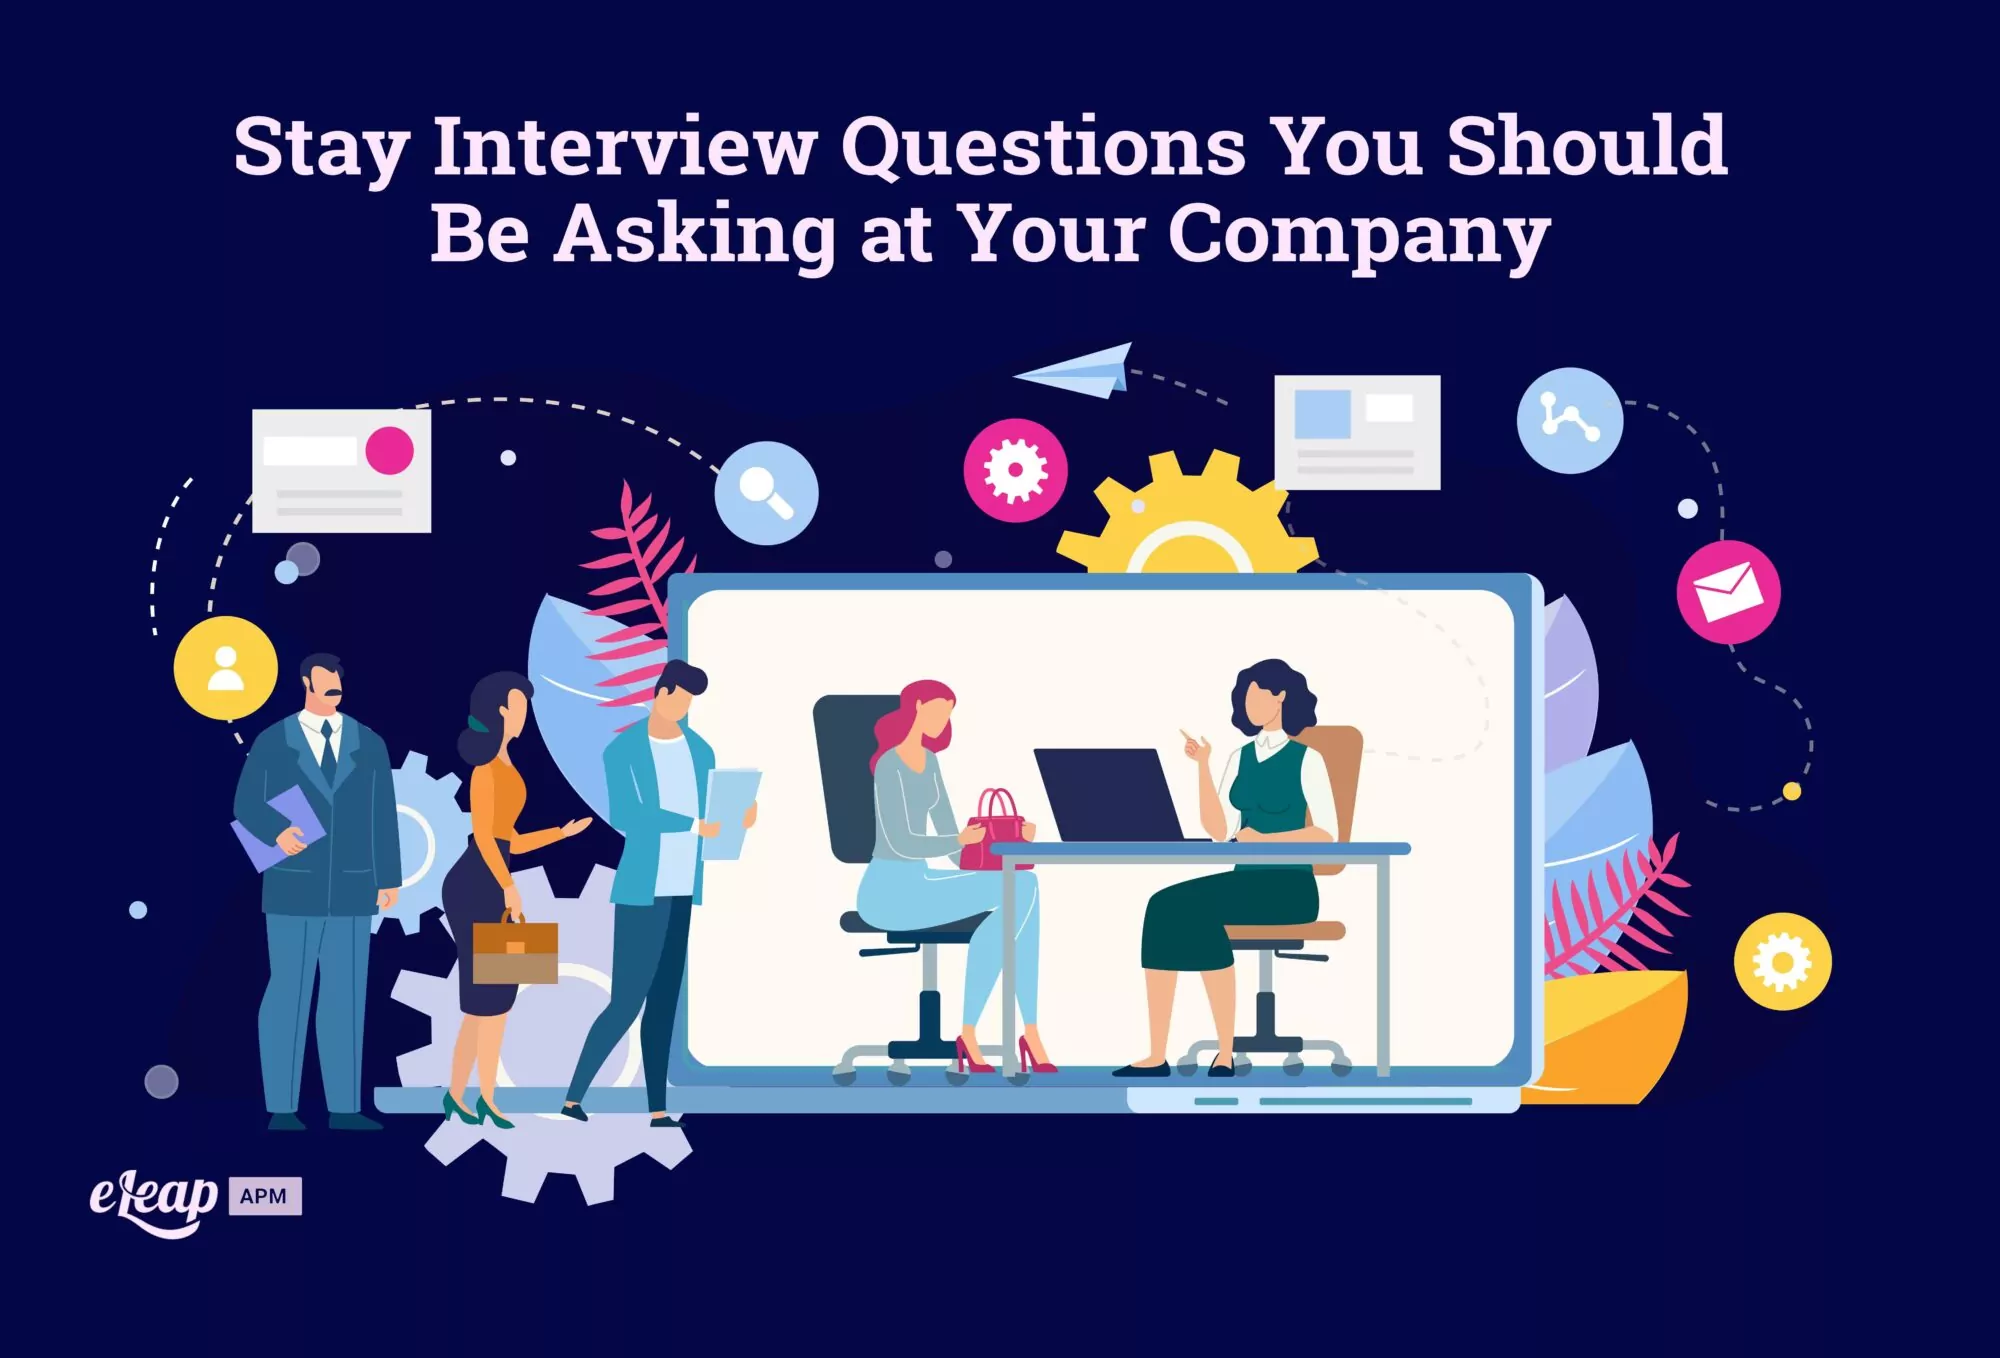 Stay Interview Questions You Should Be Asking at Your Company